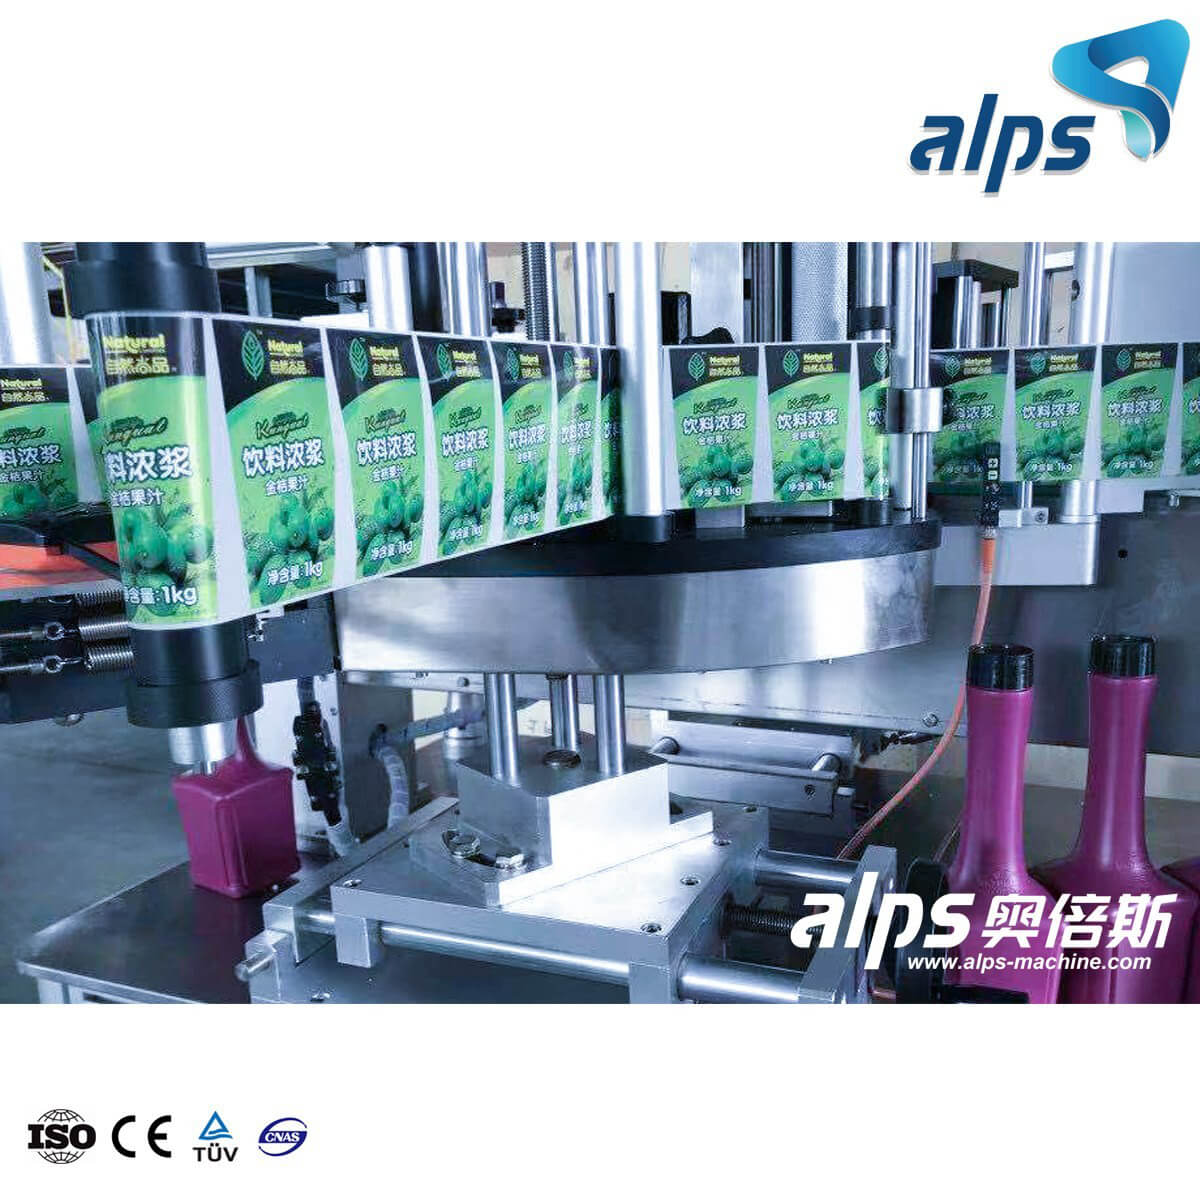 Automatic Bottle Self Adhesive Position Labeling Machine (Model:DWT06)